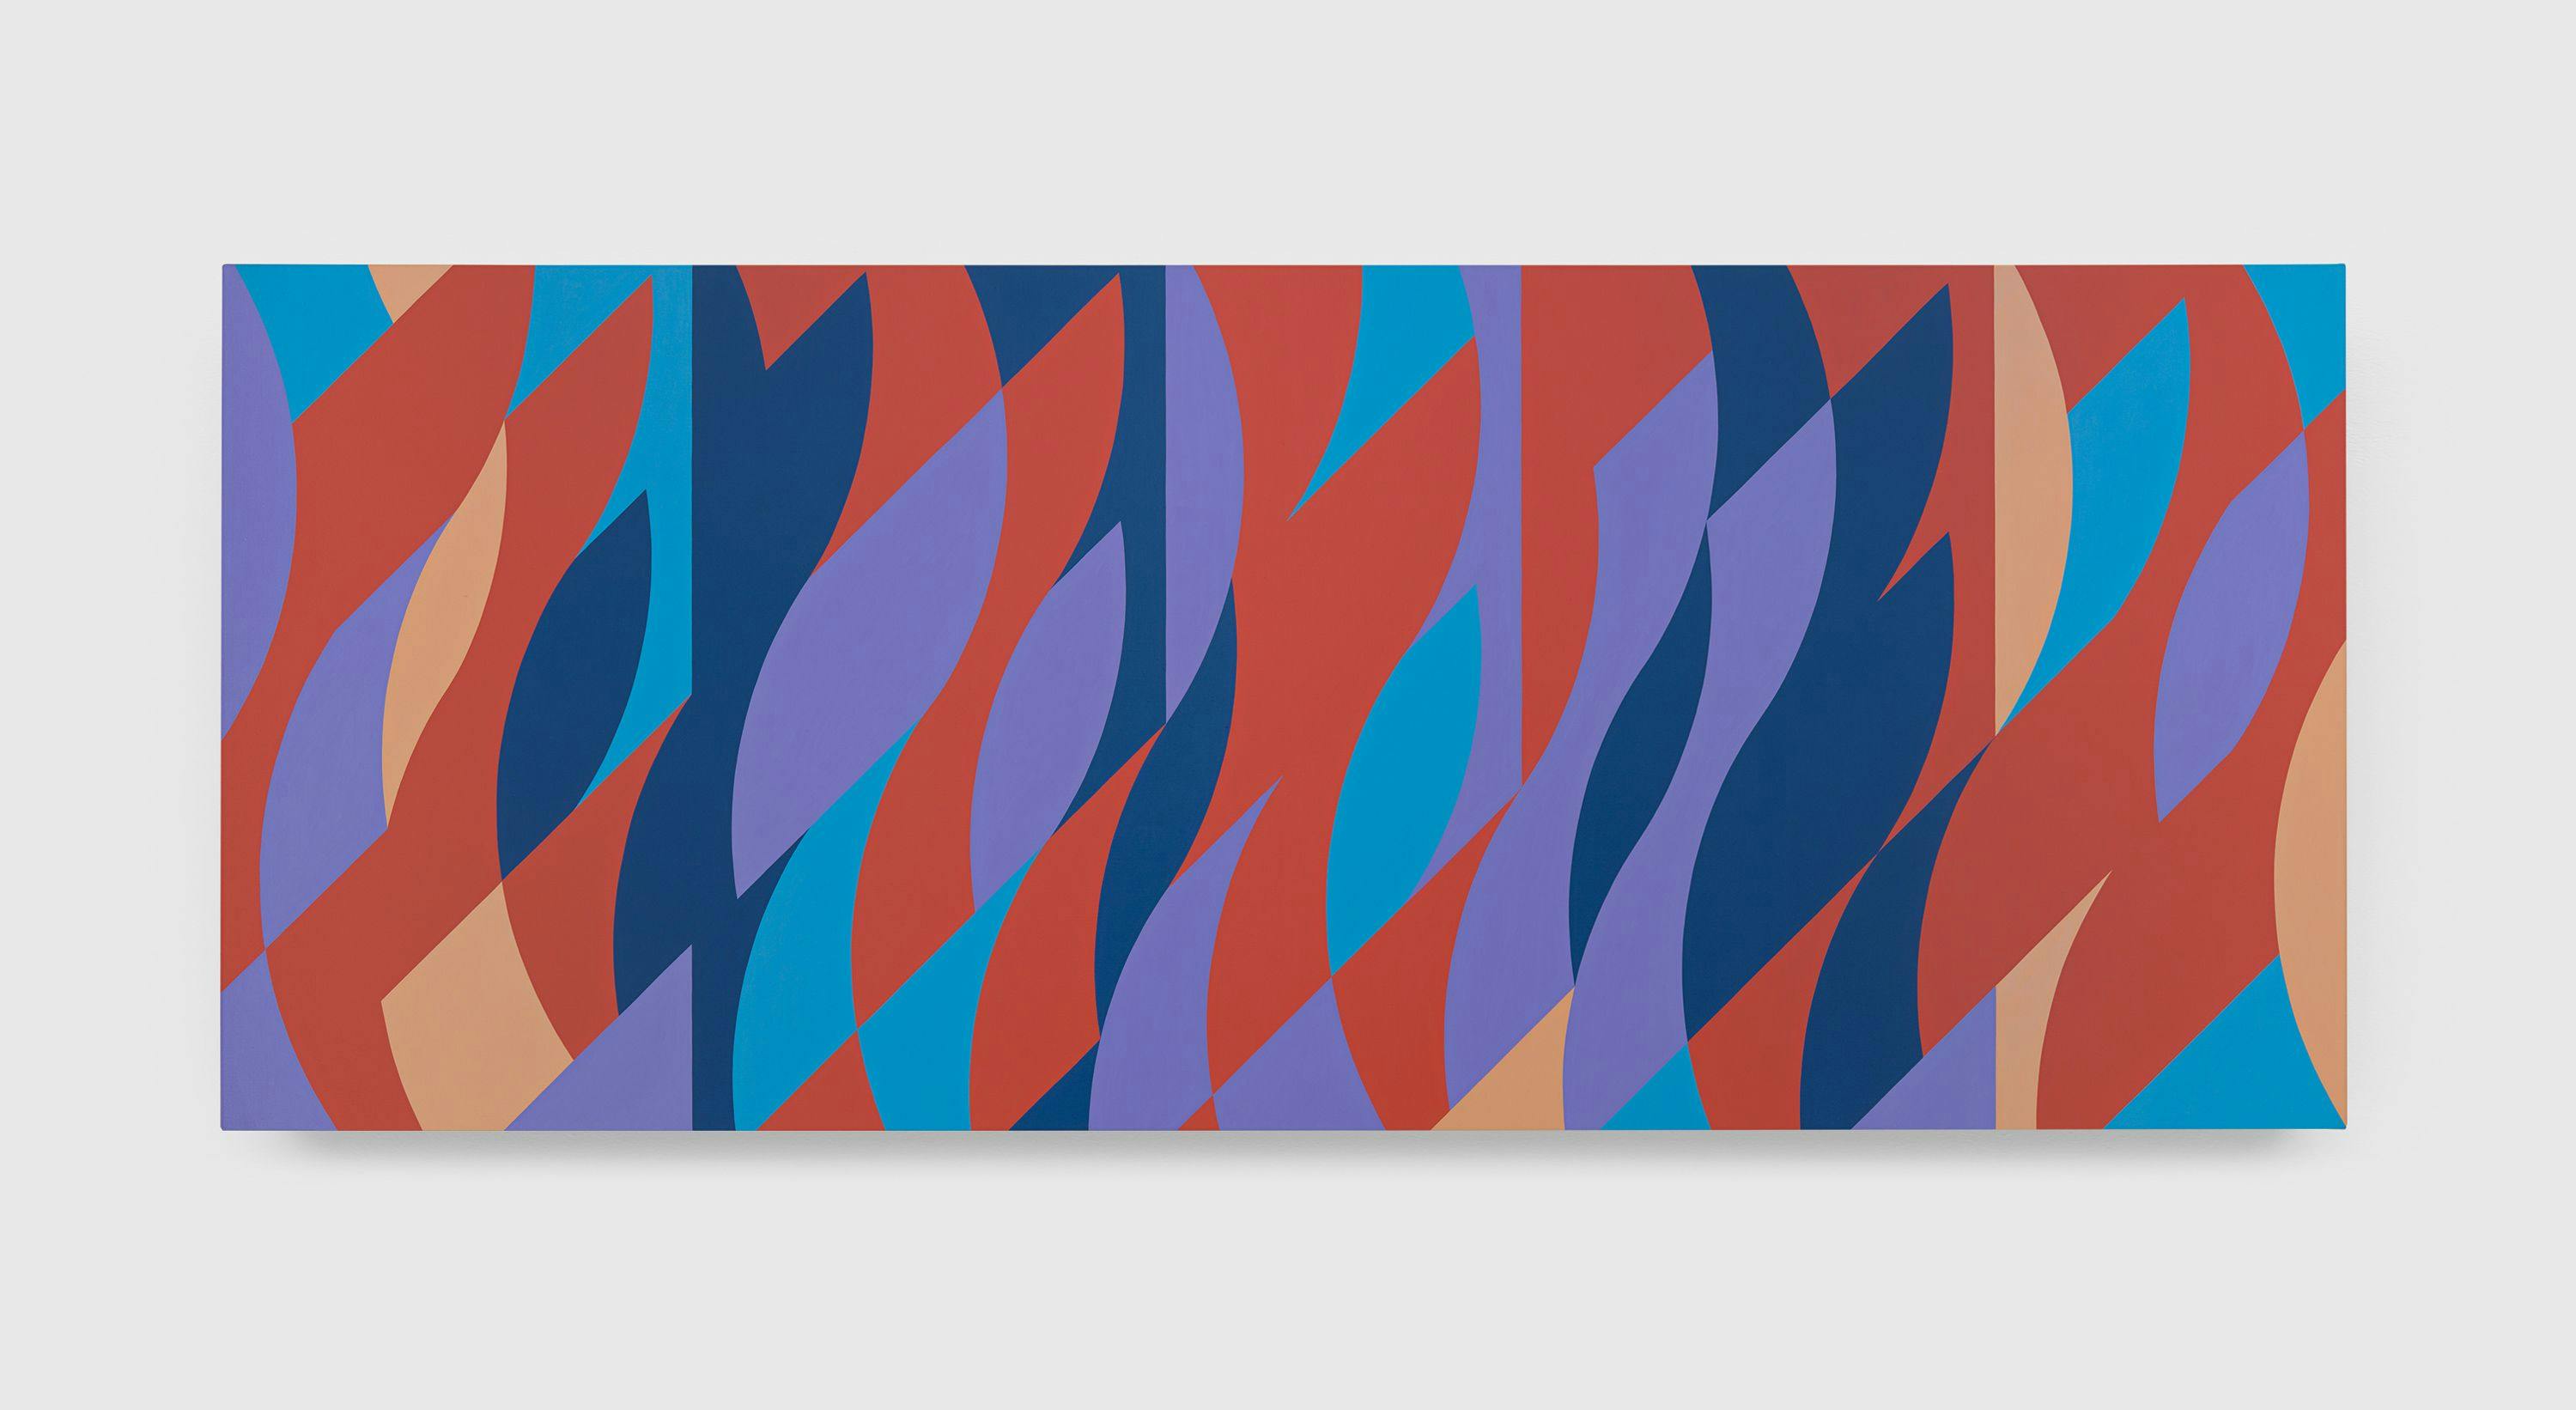 A painting by Bridget Riley, titled Cadence 10, dated 2008.